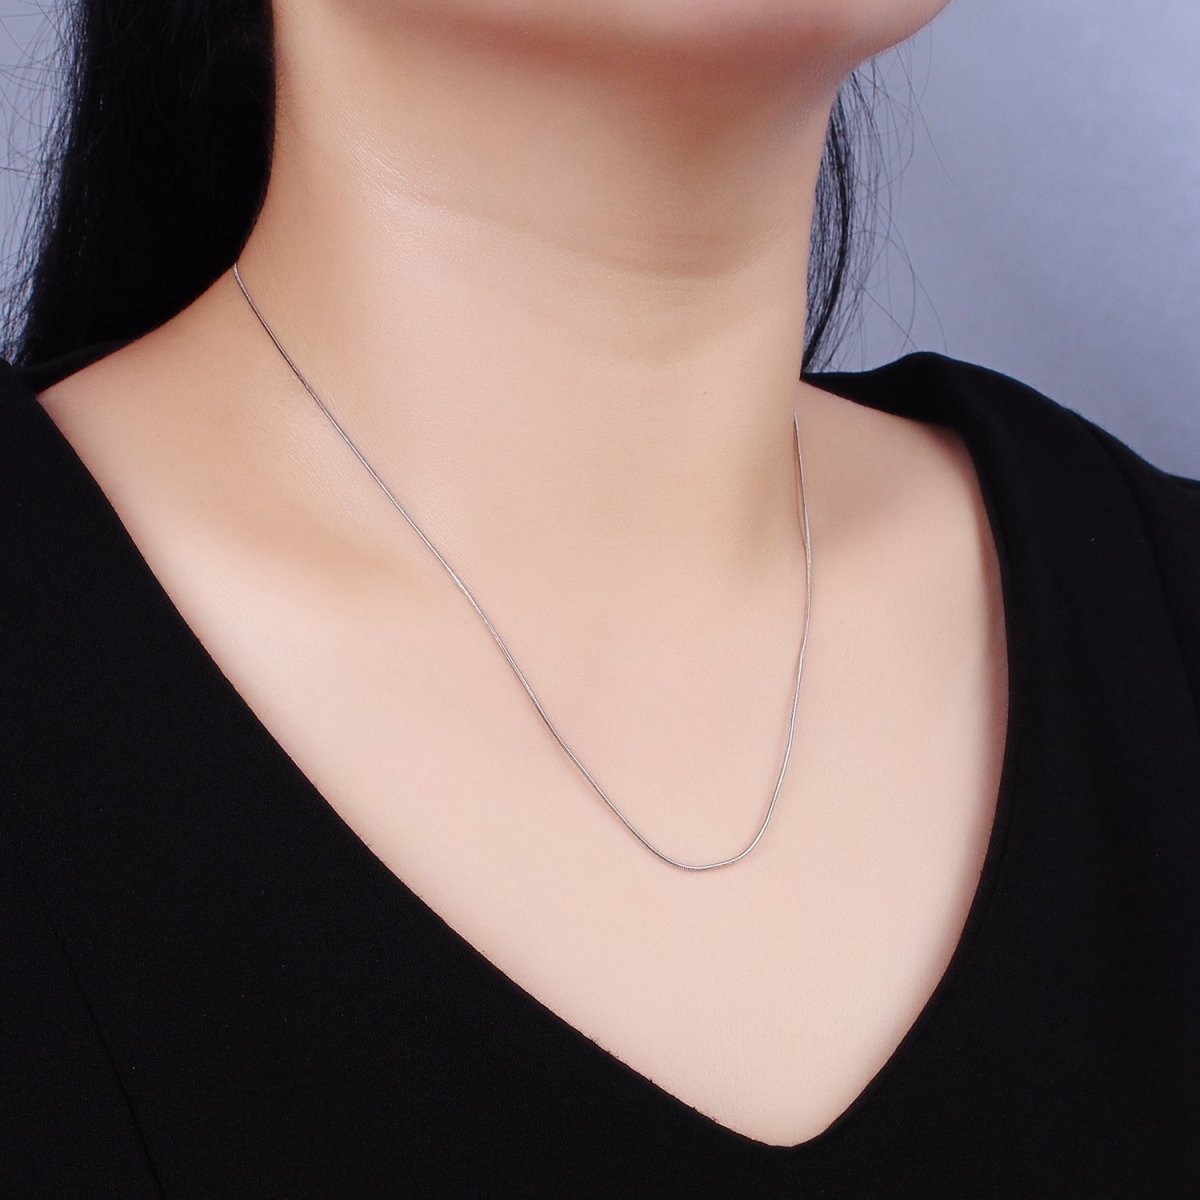 Dainty S925 Sterling Silver 0.7mm Snake Cocoon Chain 16 Inch + 2 inch Extender Chain Necklace | WA-2160 Clearance Pricing - DLUXCA